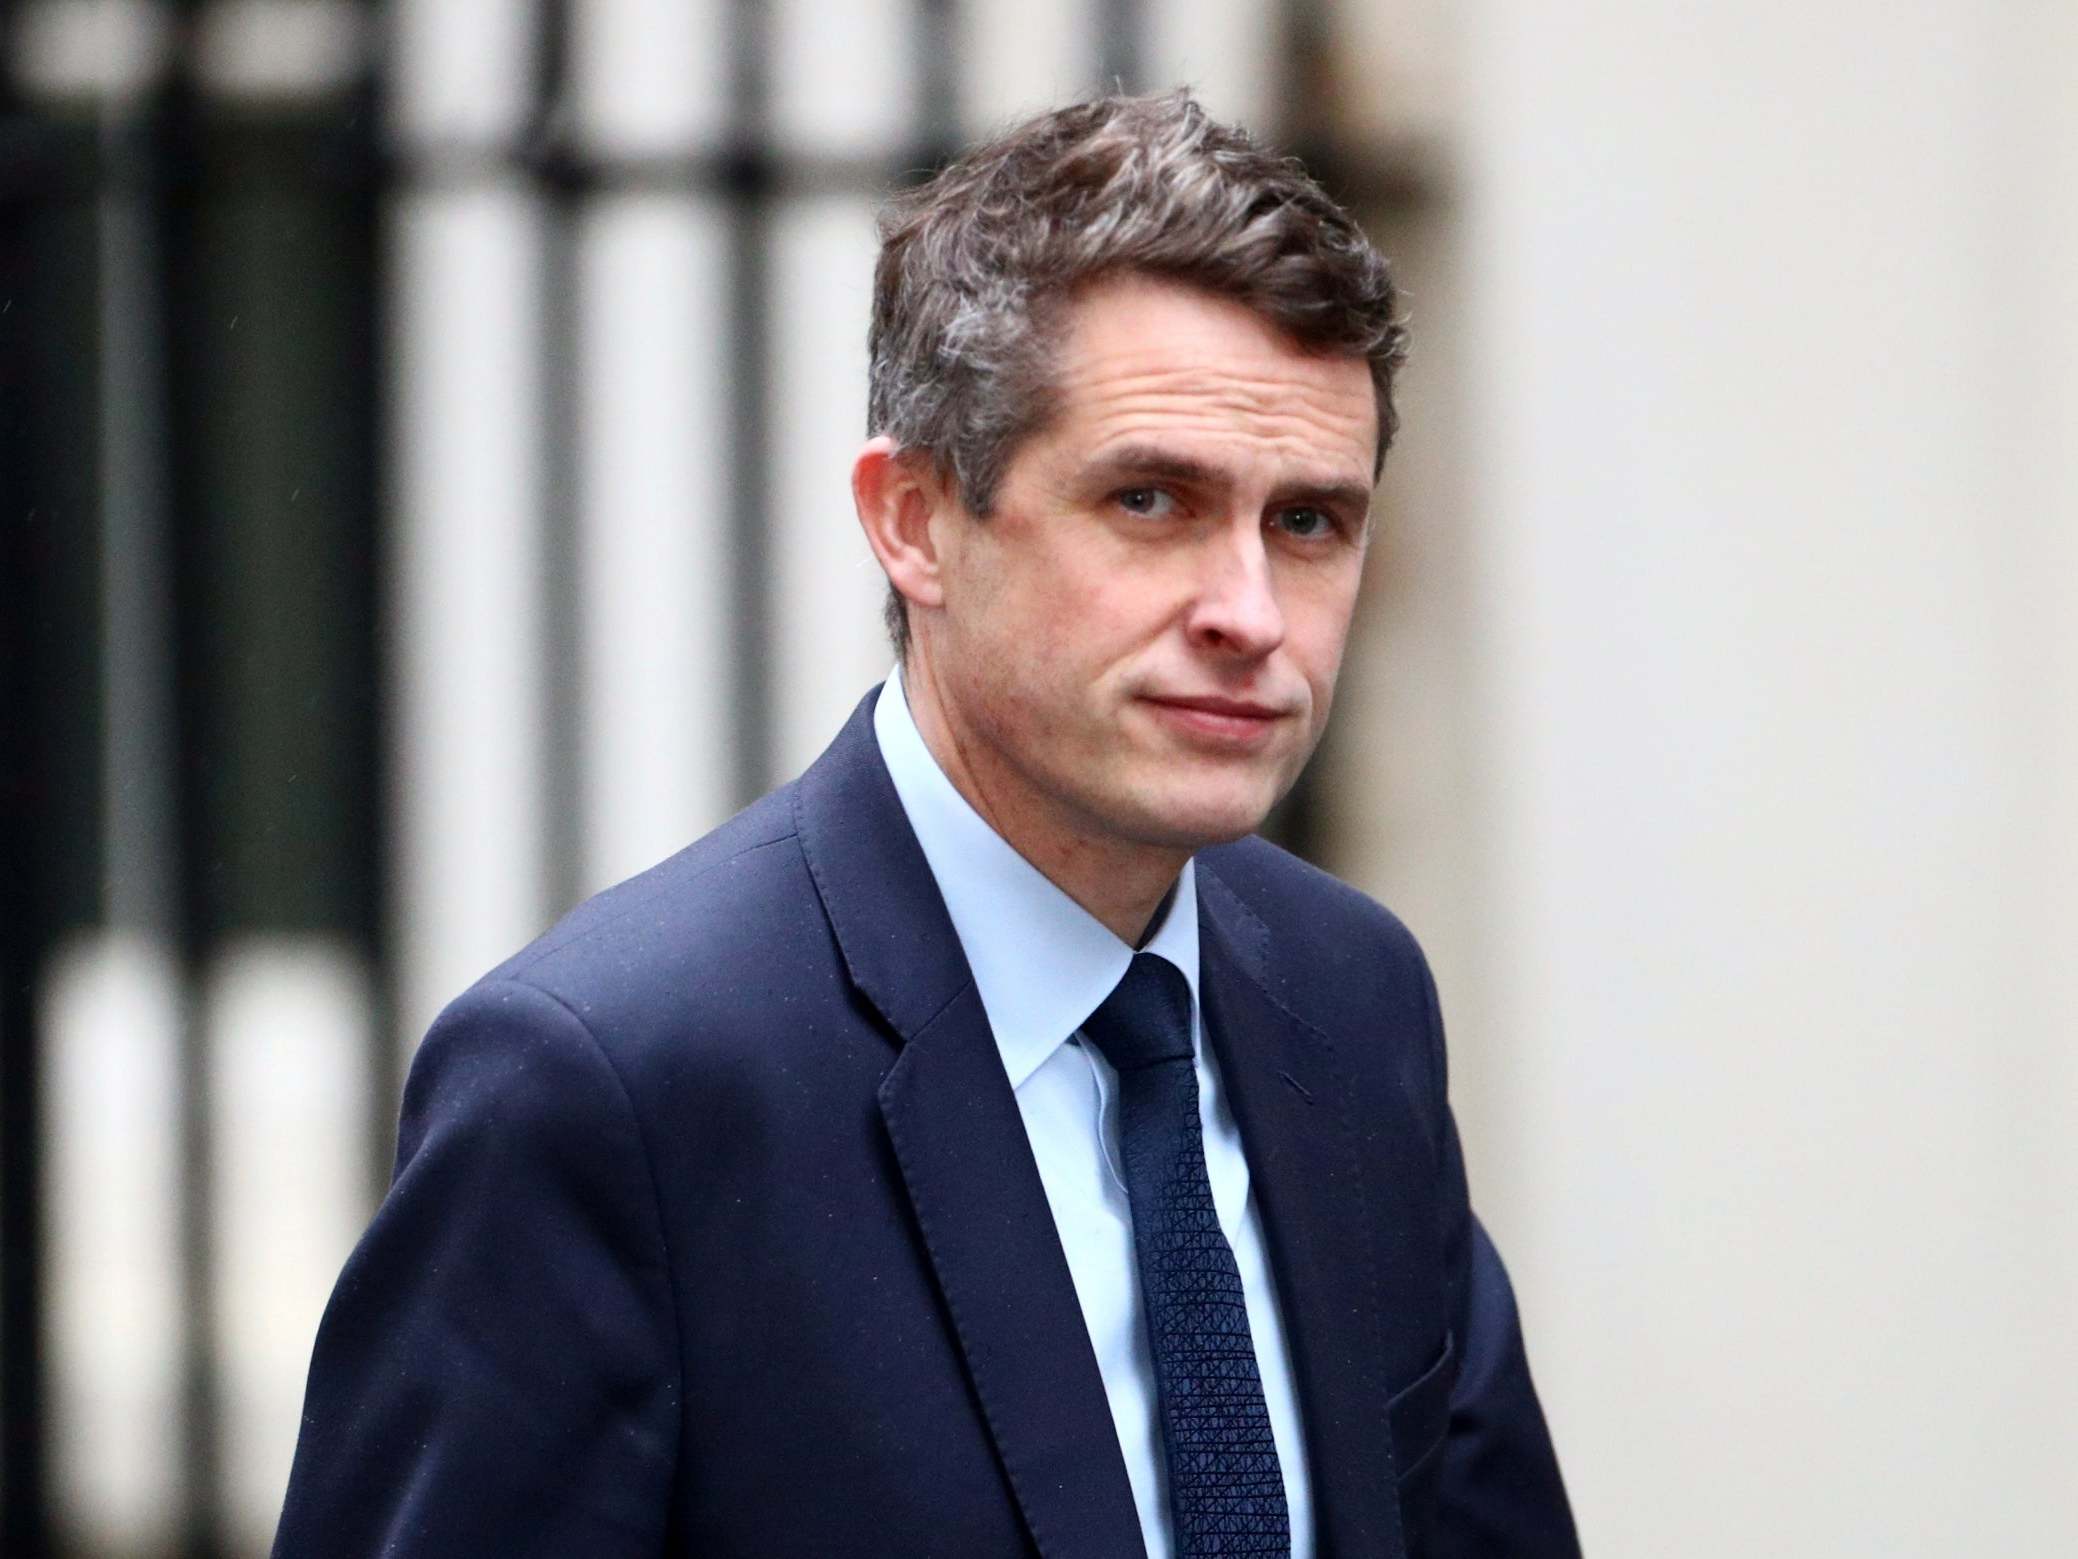 The education secretary says he will focus on the 'forgotten' 50 per cent of young people